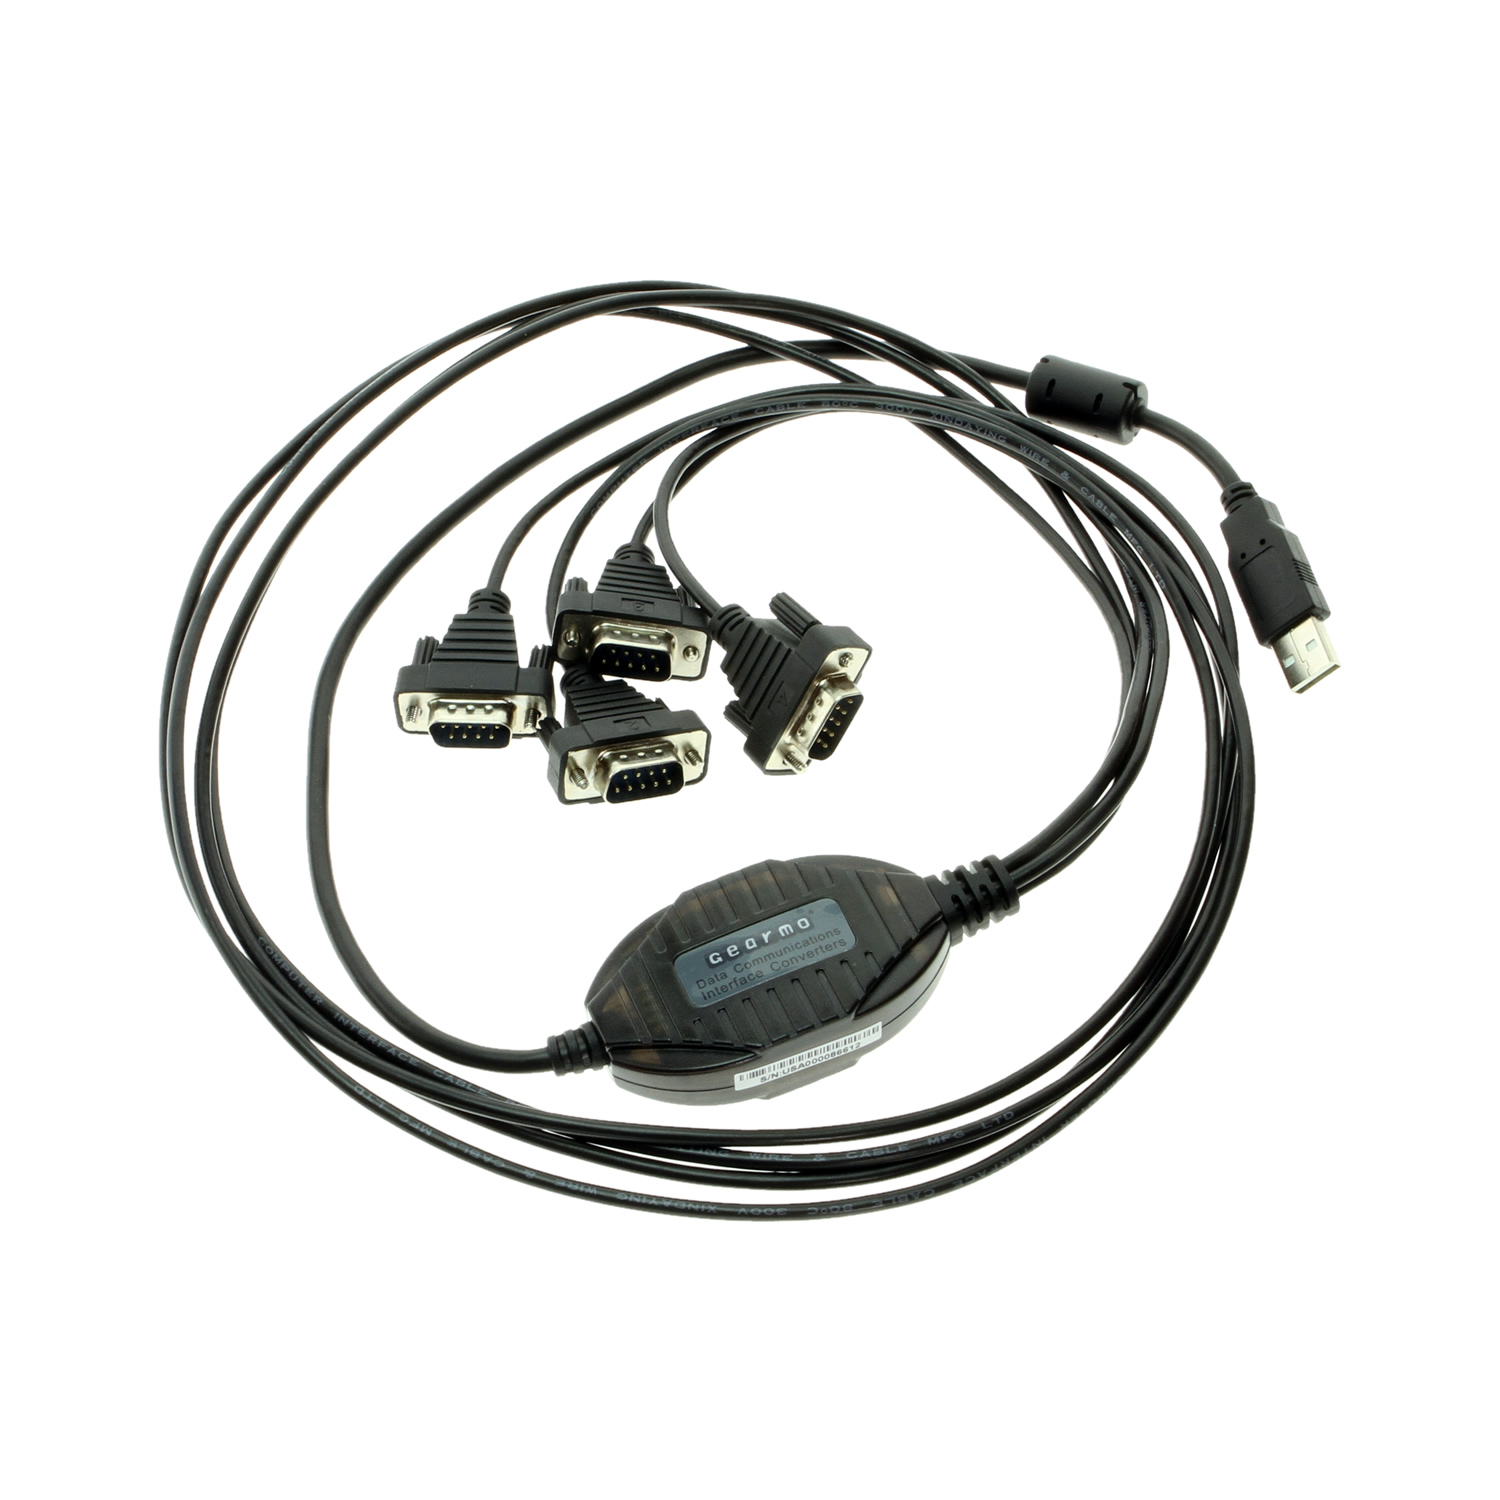 4 Professional USB to Serial Adapter